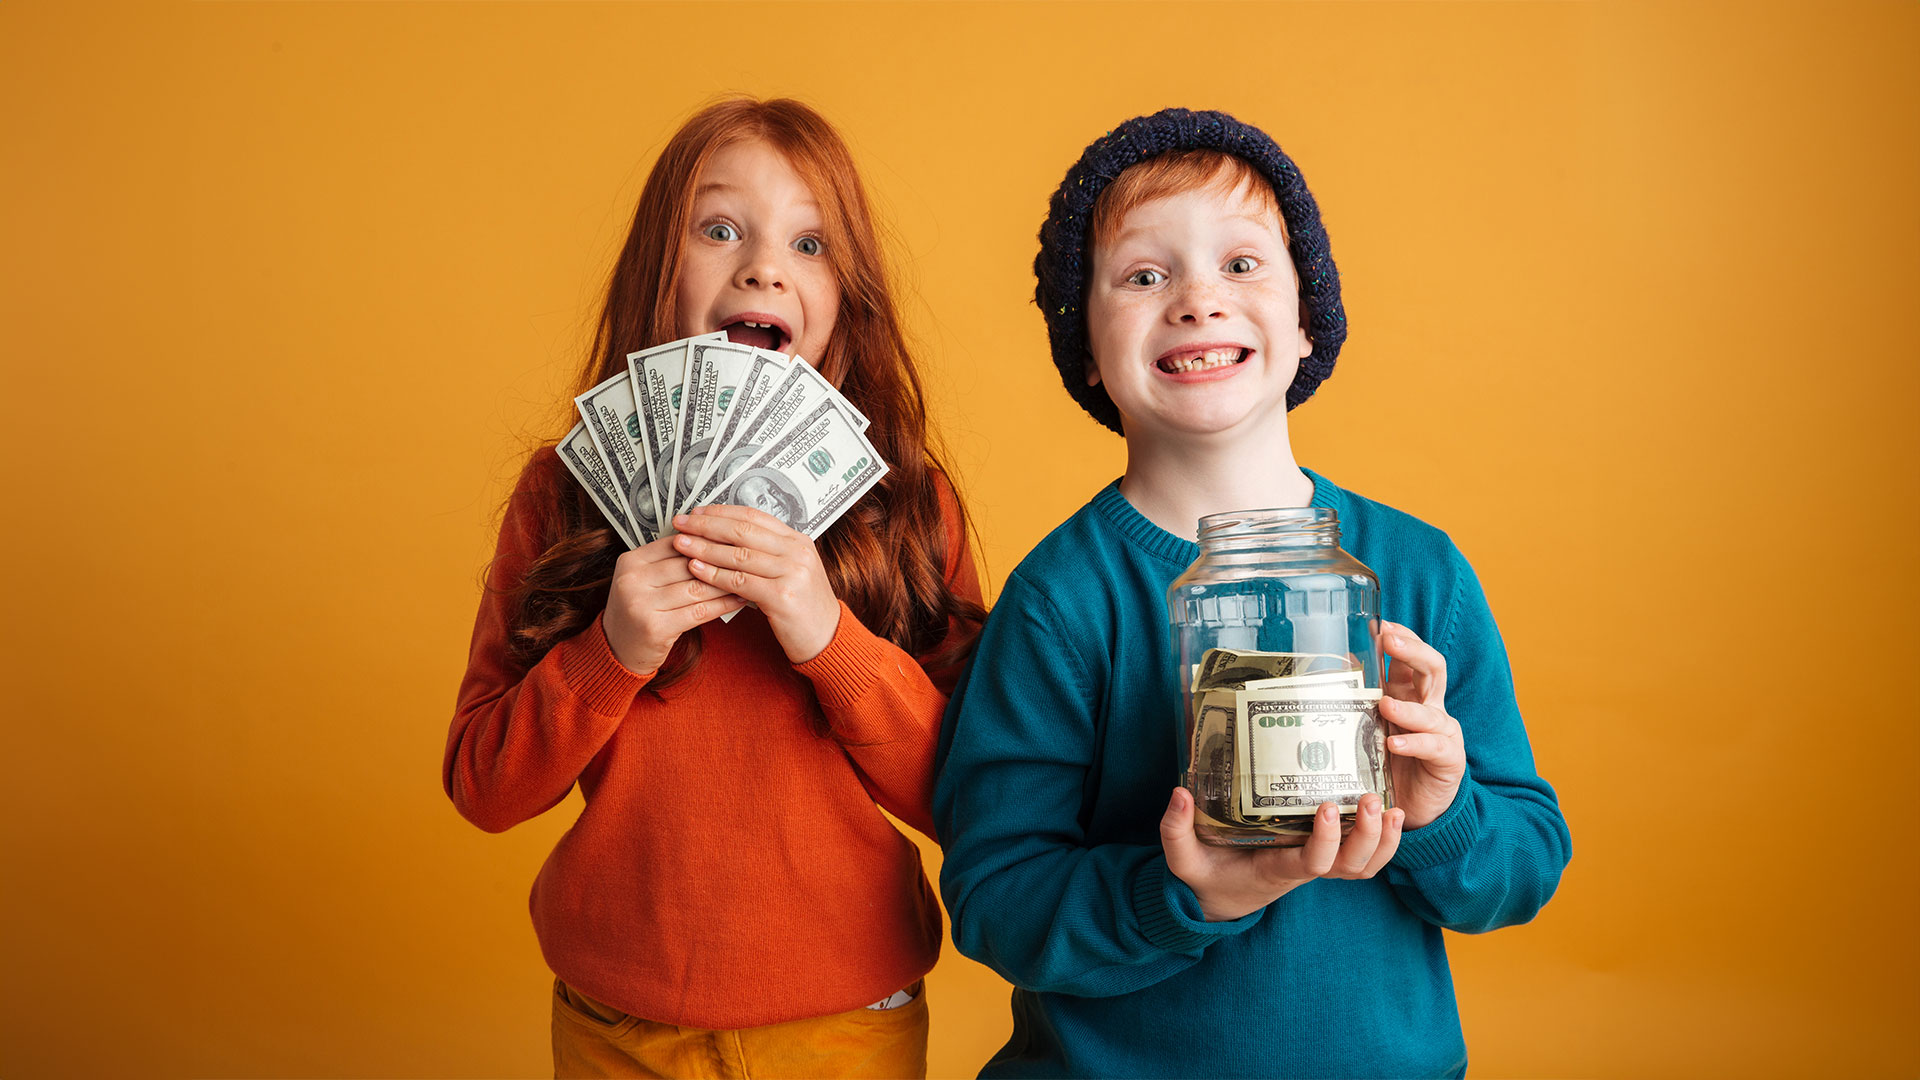 12 Ways to Make Money as a Kid: Unlock Your Entrepreneurial Potential